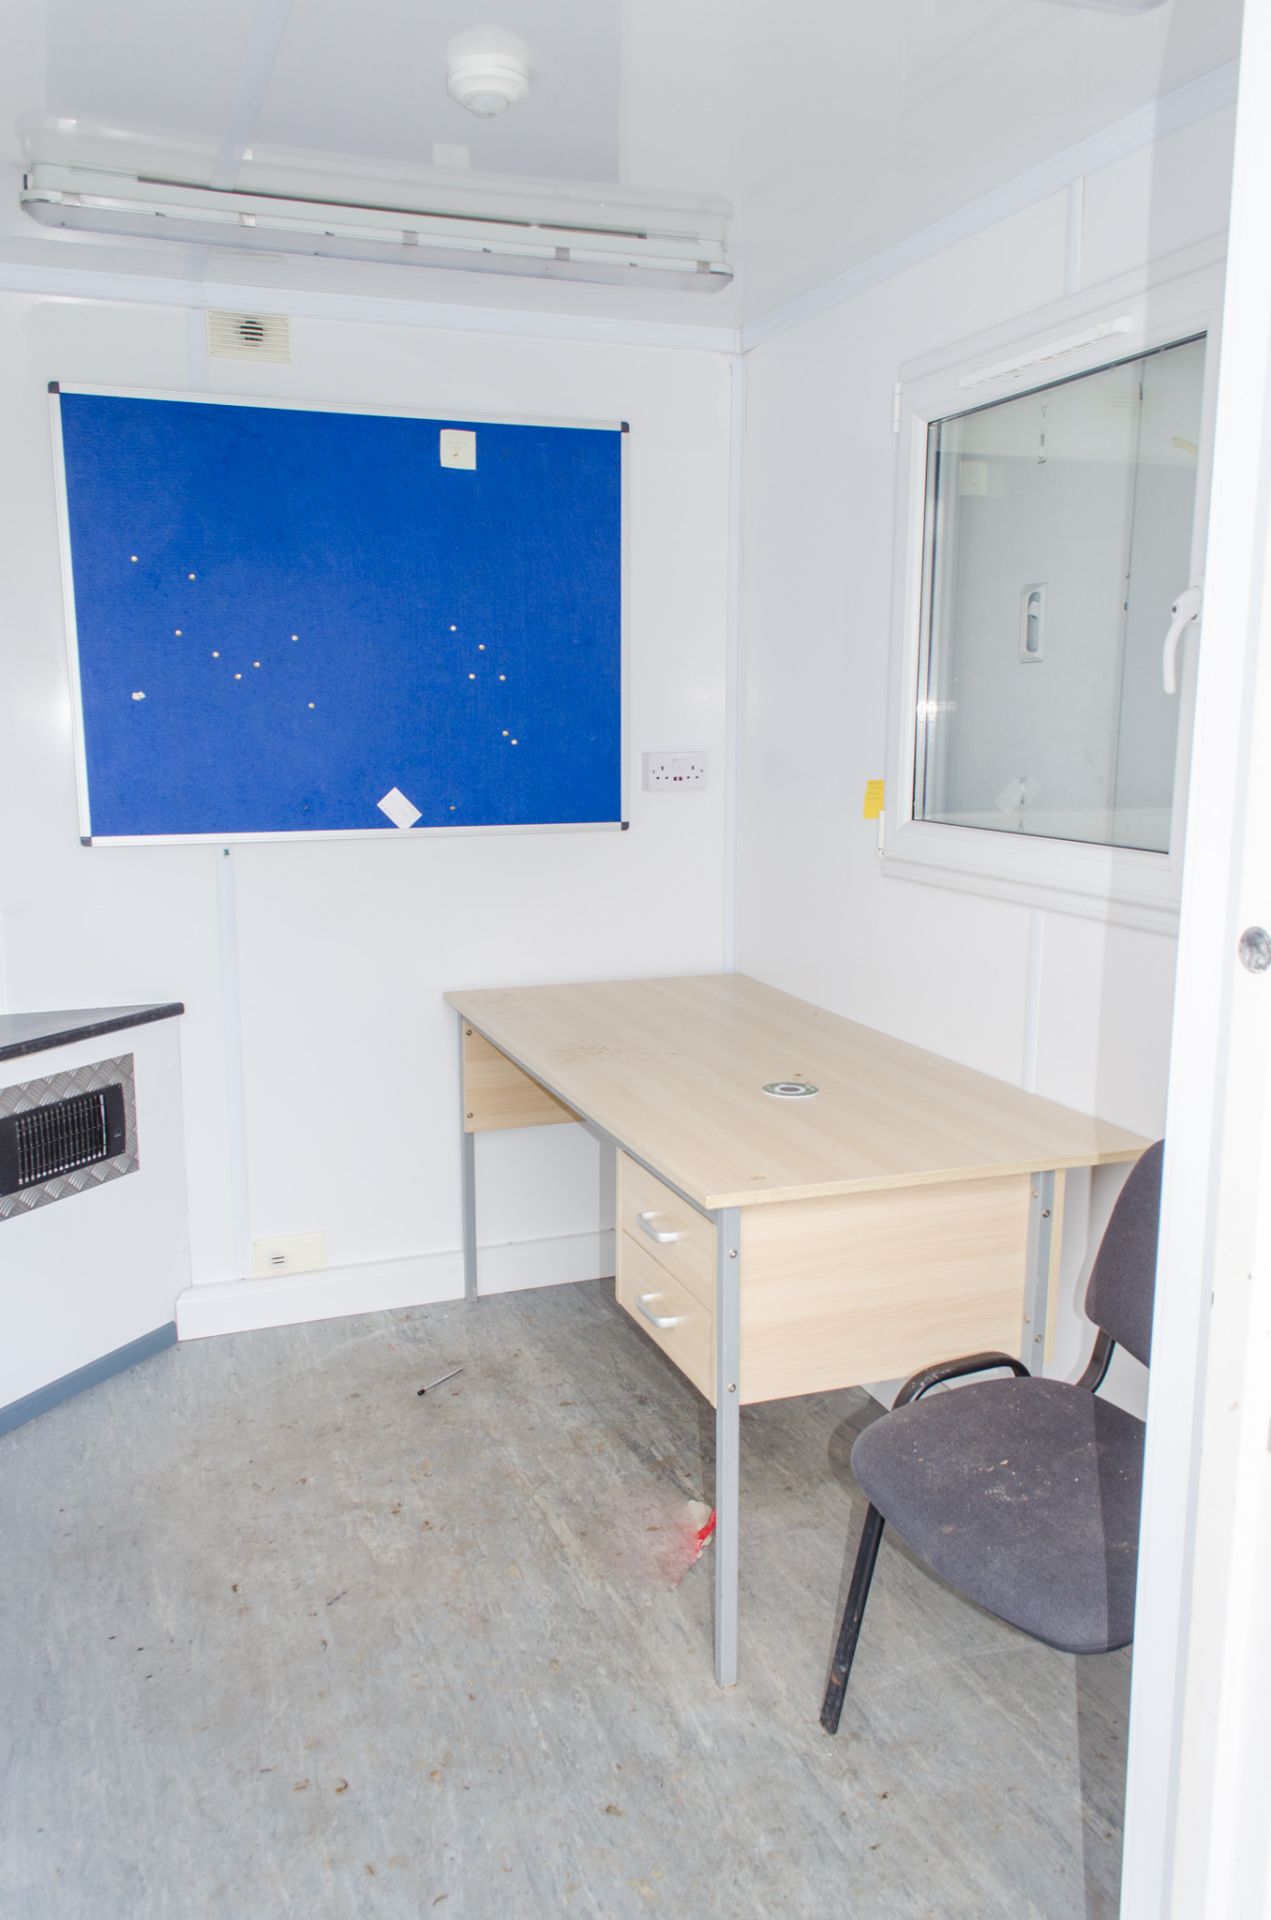 24 ft x 9 ft steel anti vandal welfare site unit Comprising of: Canteen, drying room, office, toilet - Image 8 of 11